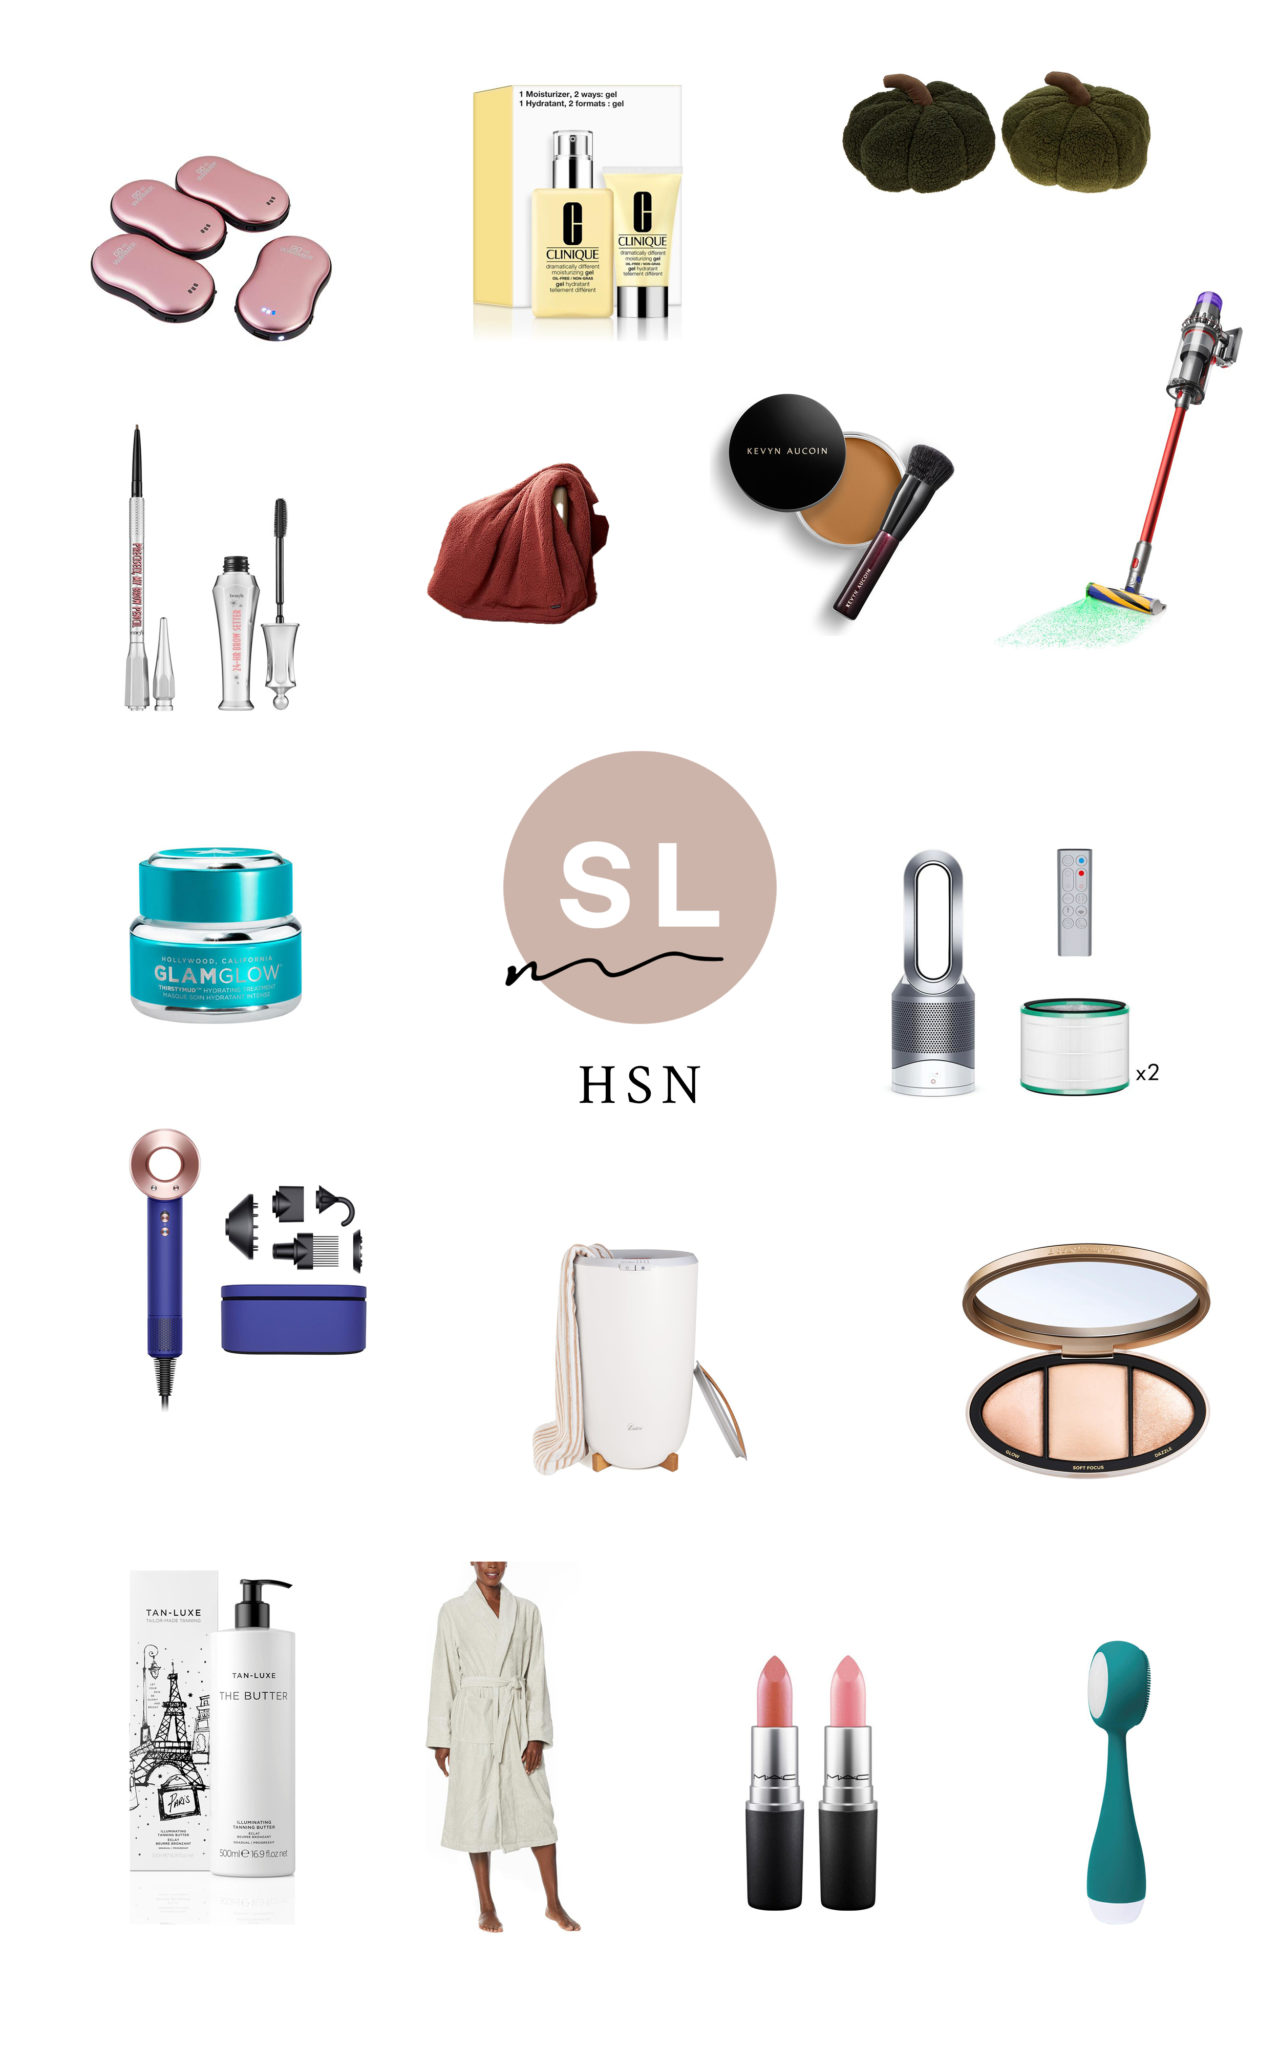 collage of items from Top Deals at HSN